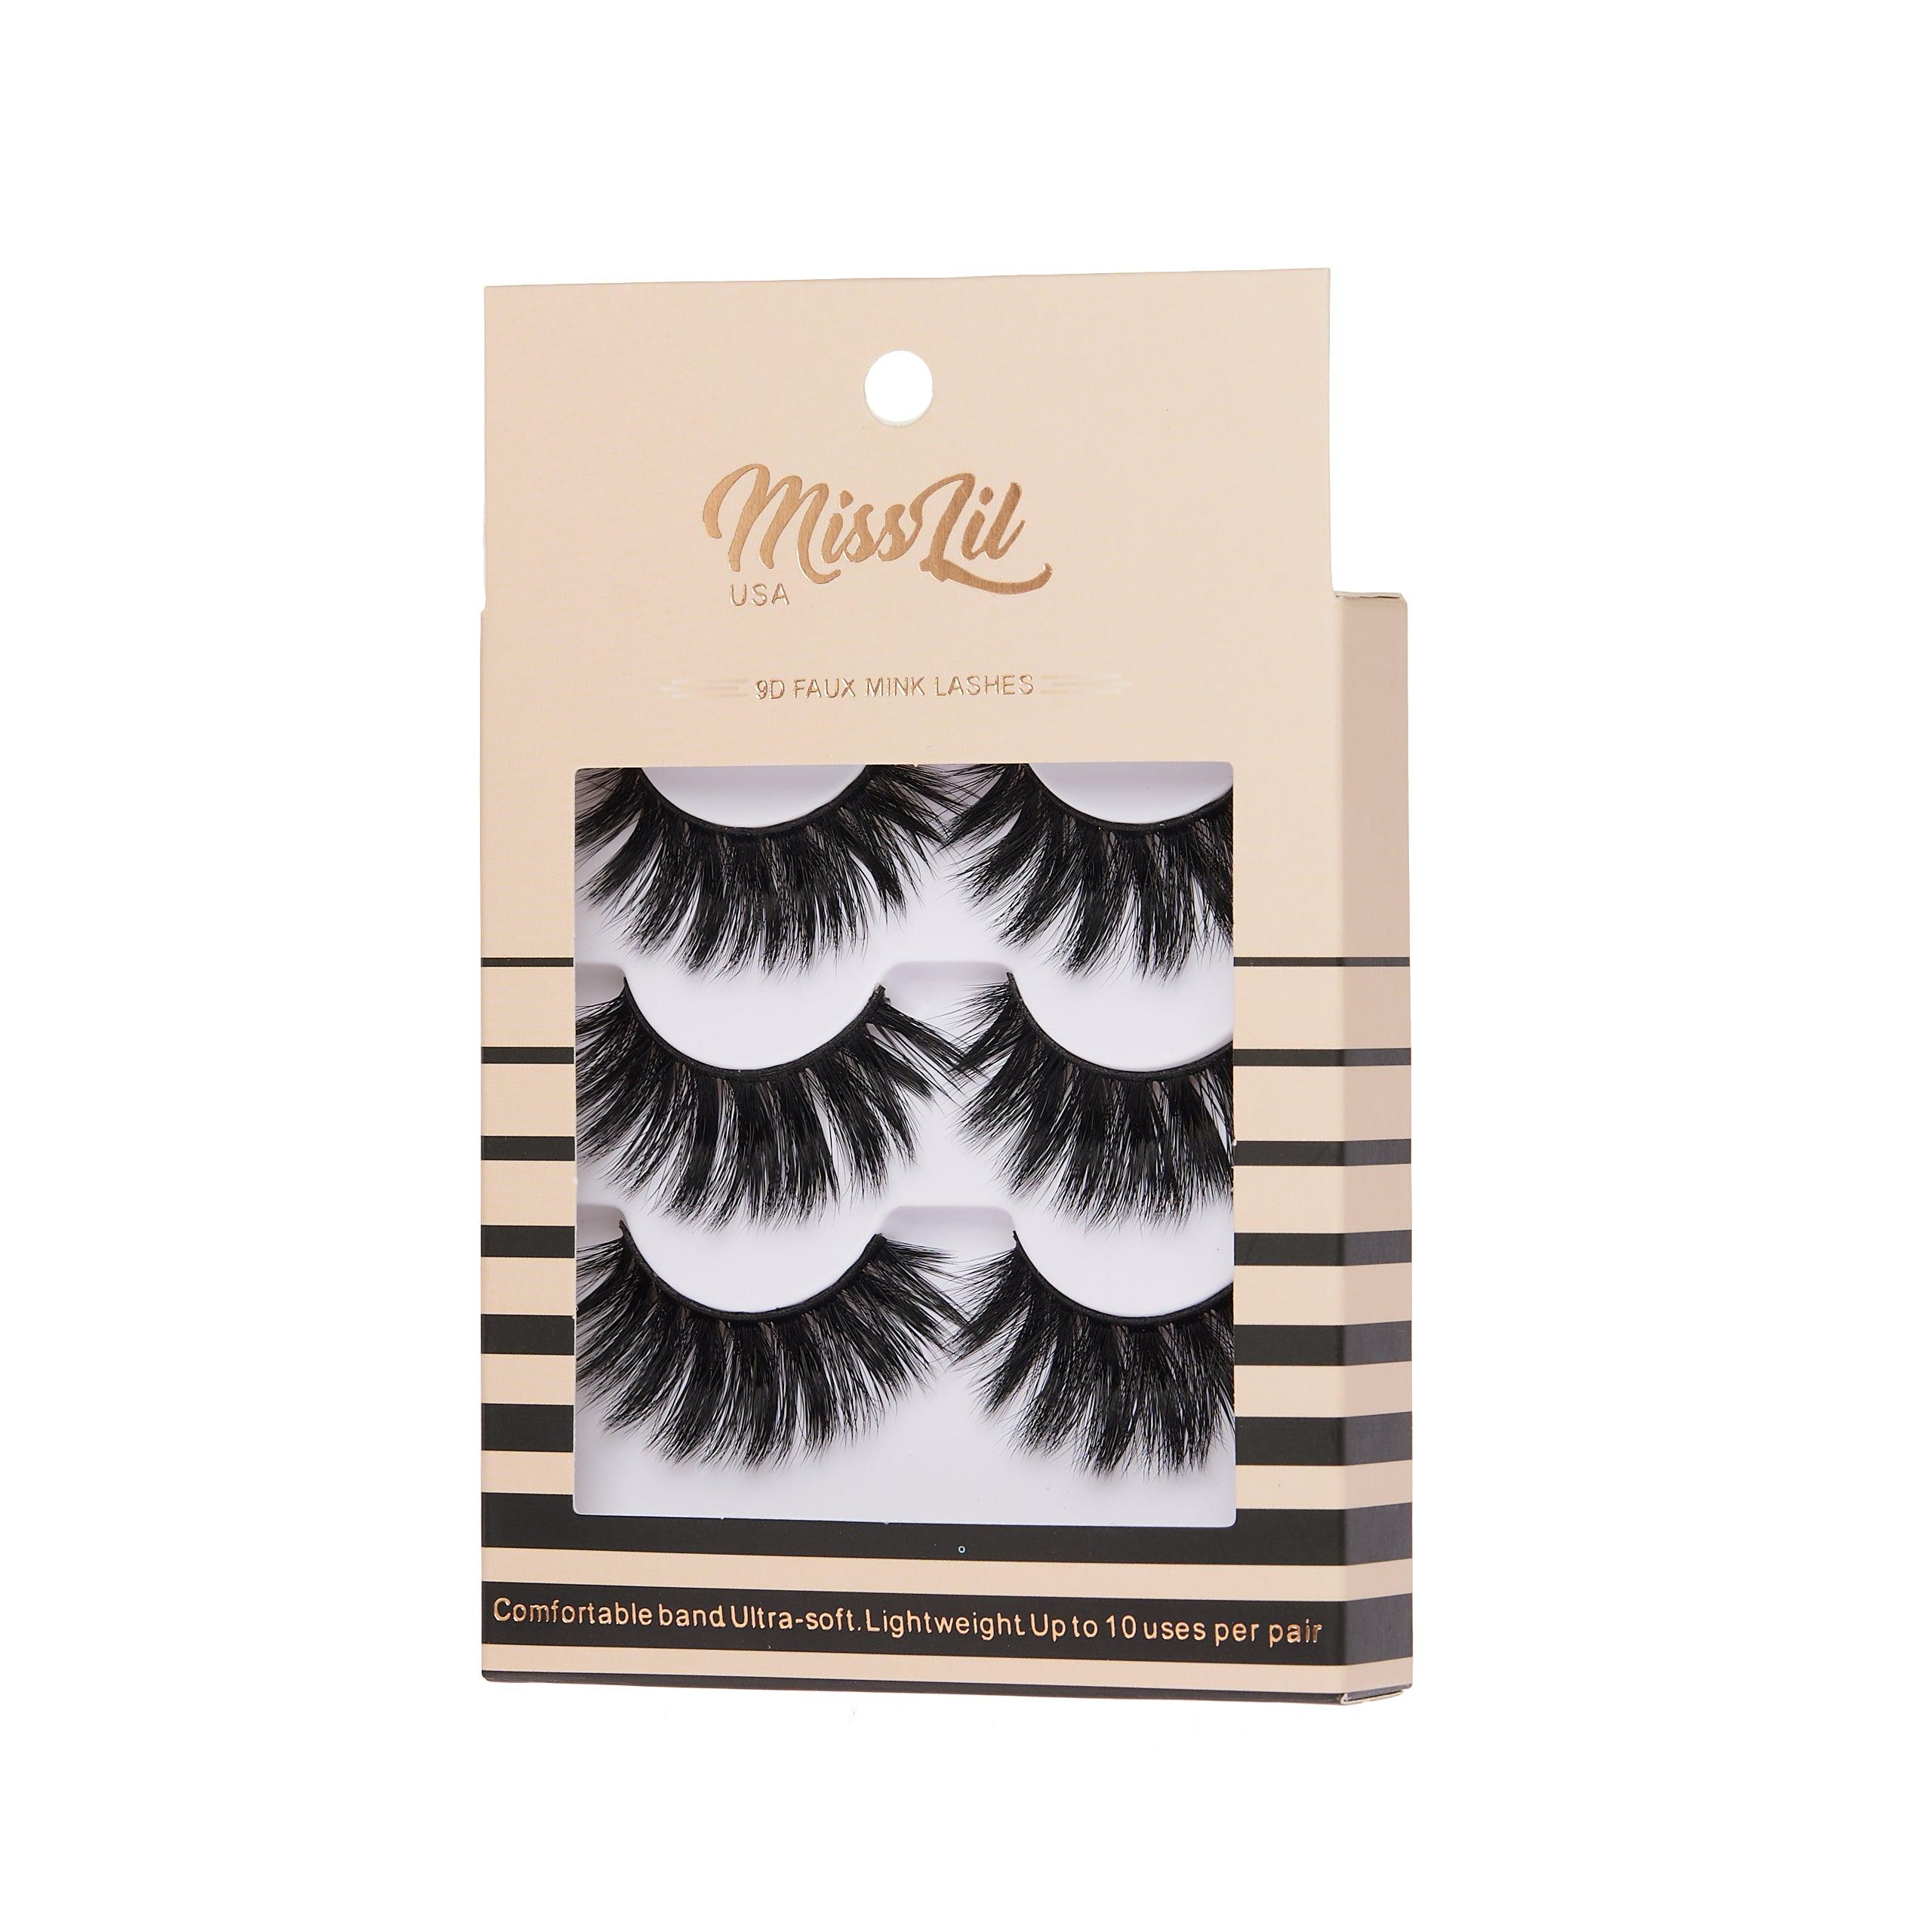 3-Pair Faux 9D Mink Eyelashes - Luxury Collection #4 - Pack of 3 - Miss Lil USA